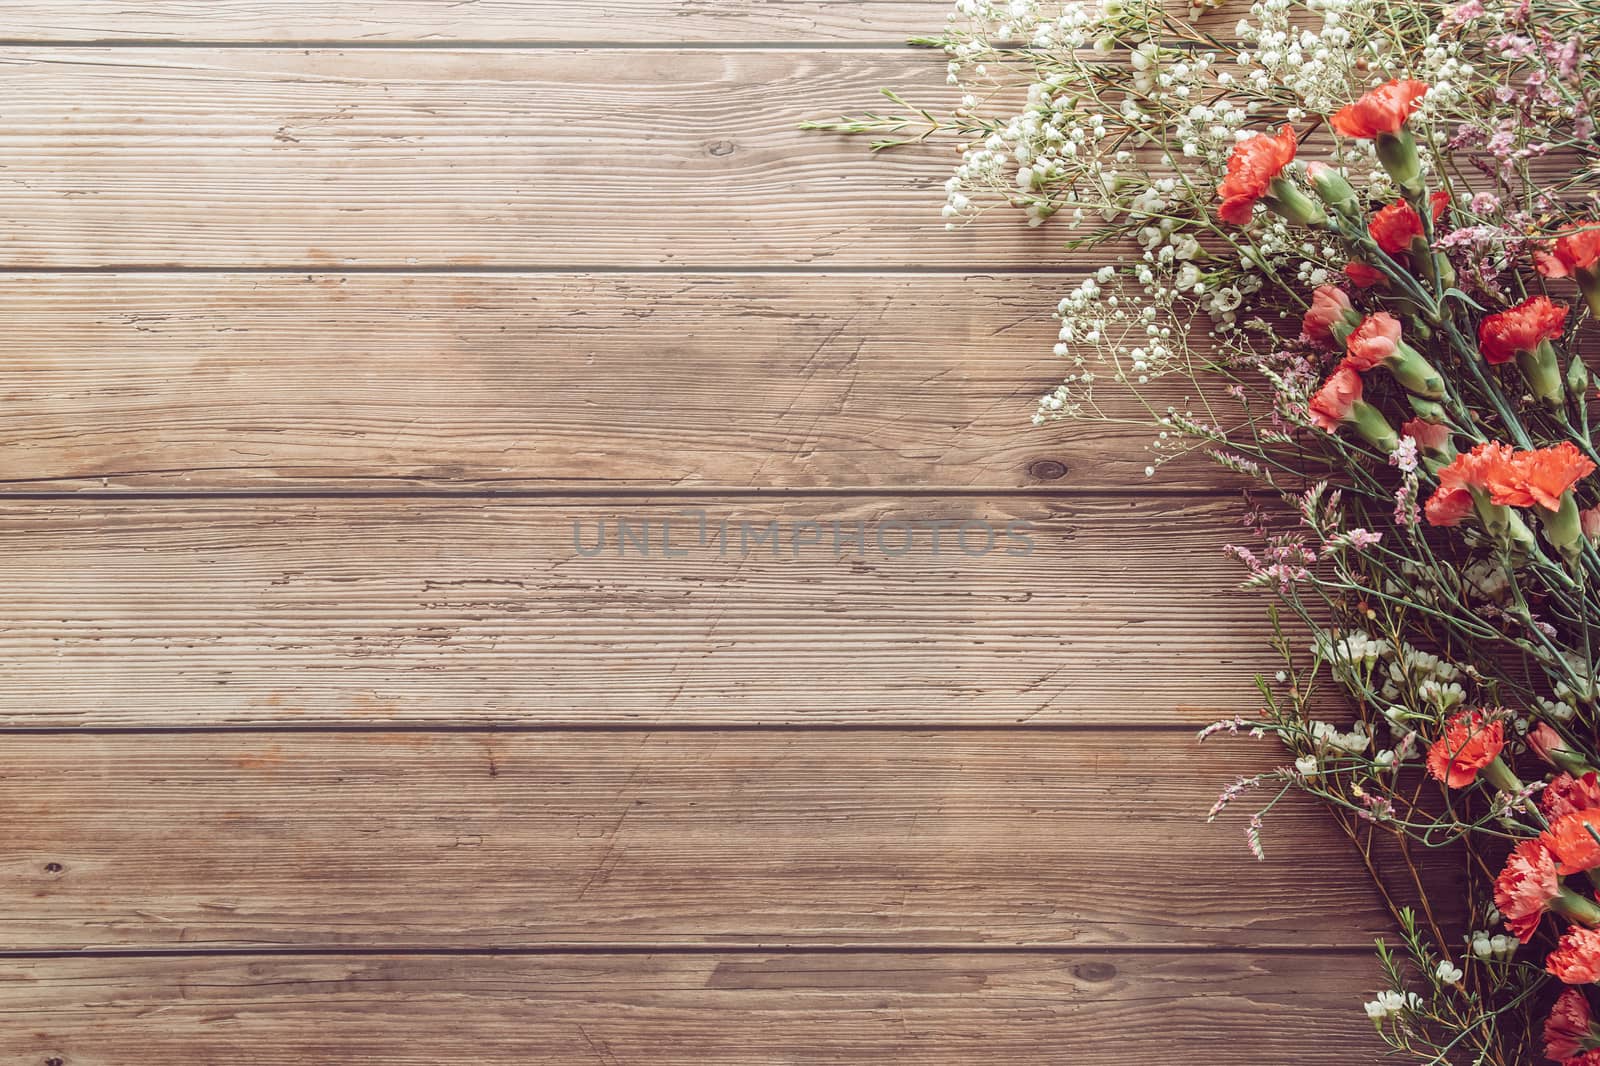 flat lay of garden spring white and red tiny flowers on wooden plank table background with copy space, retro color style